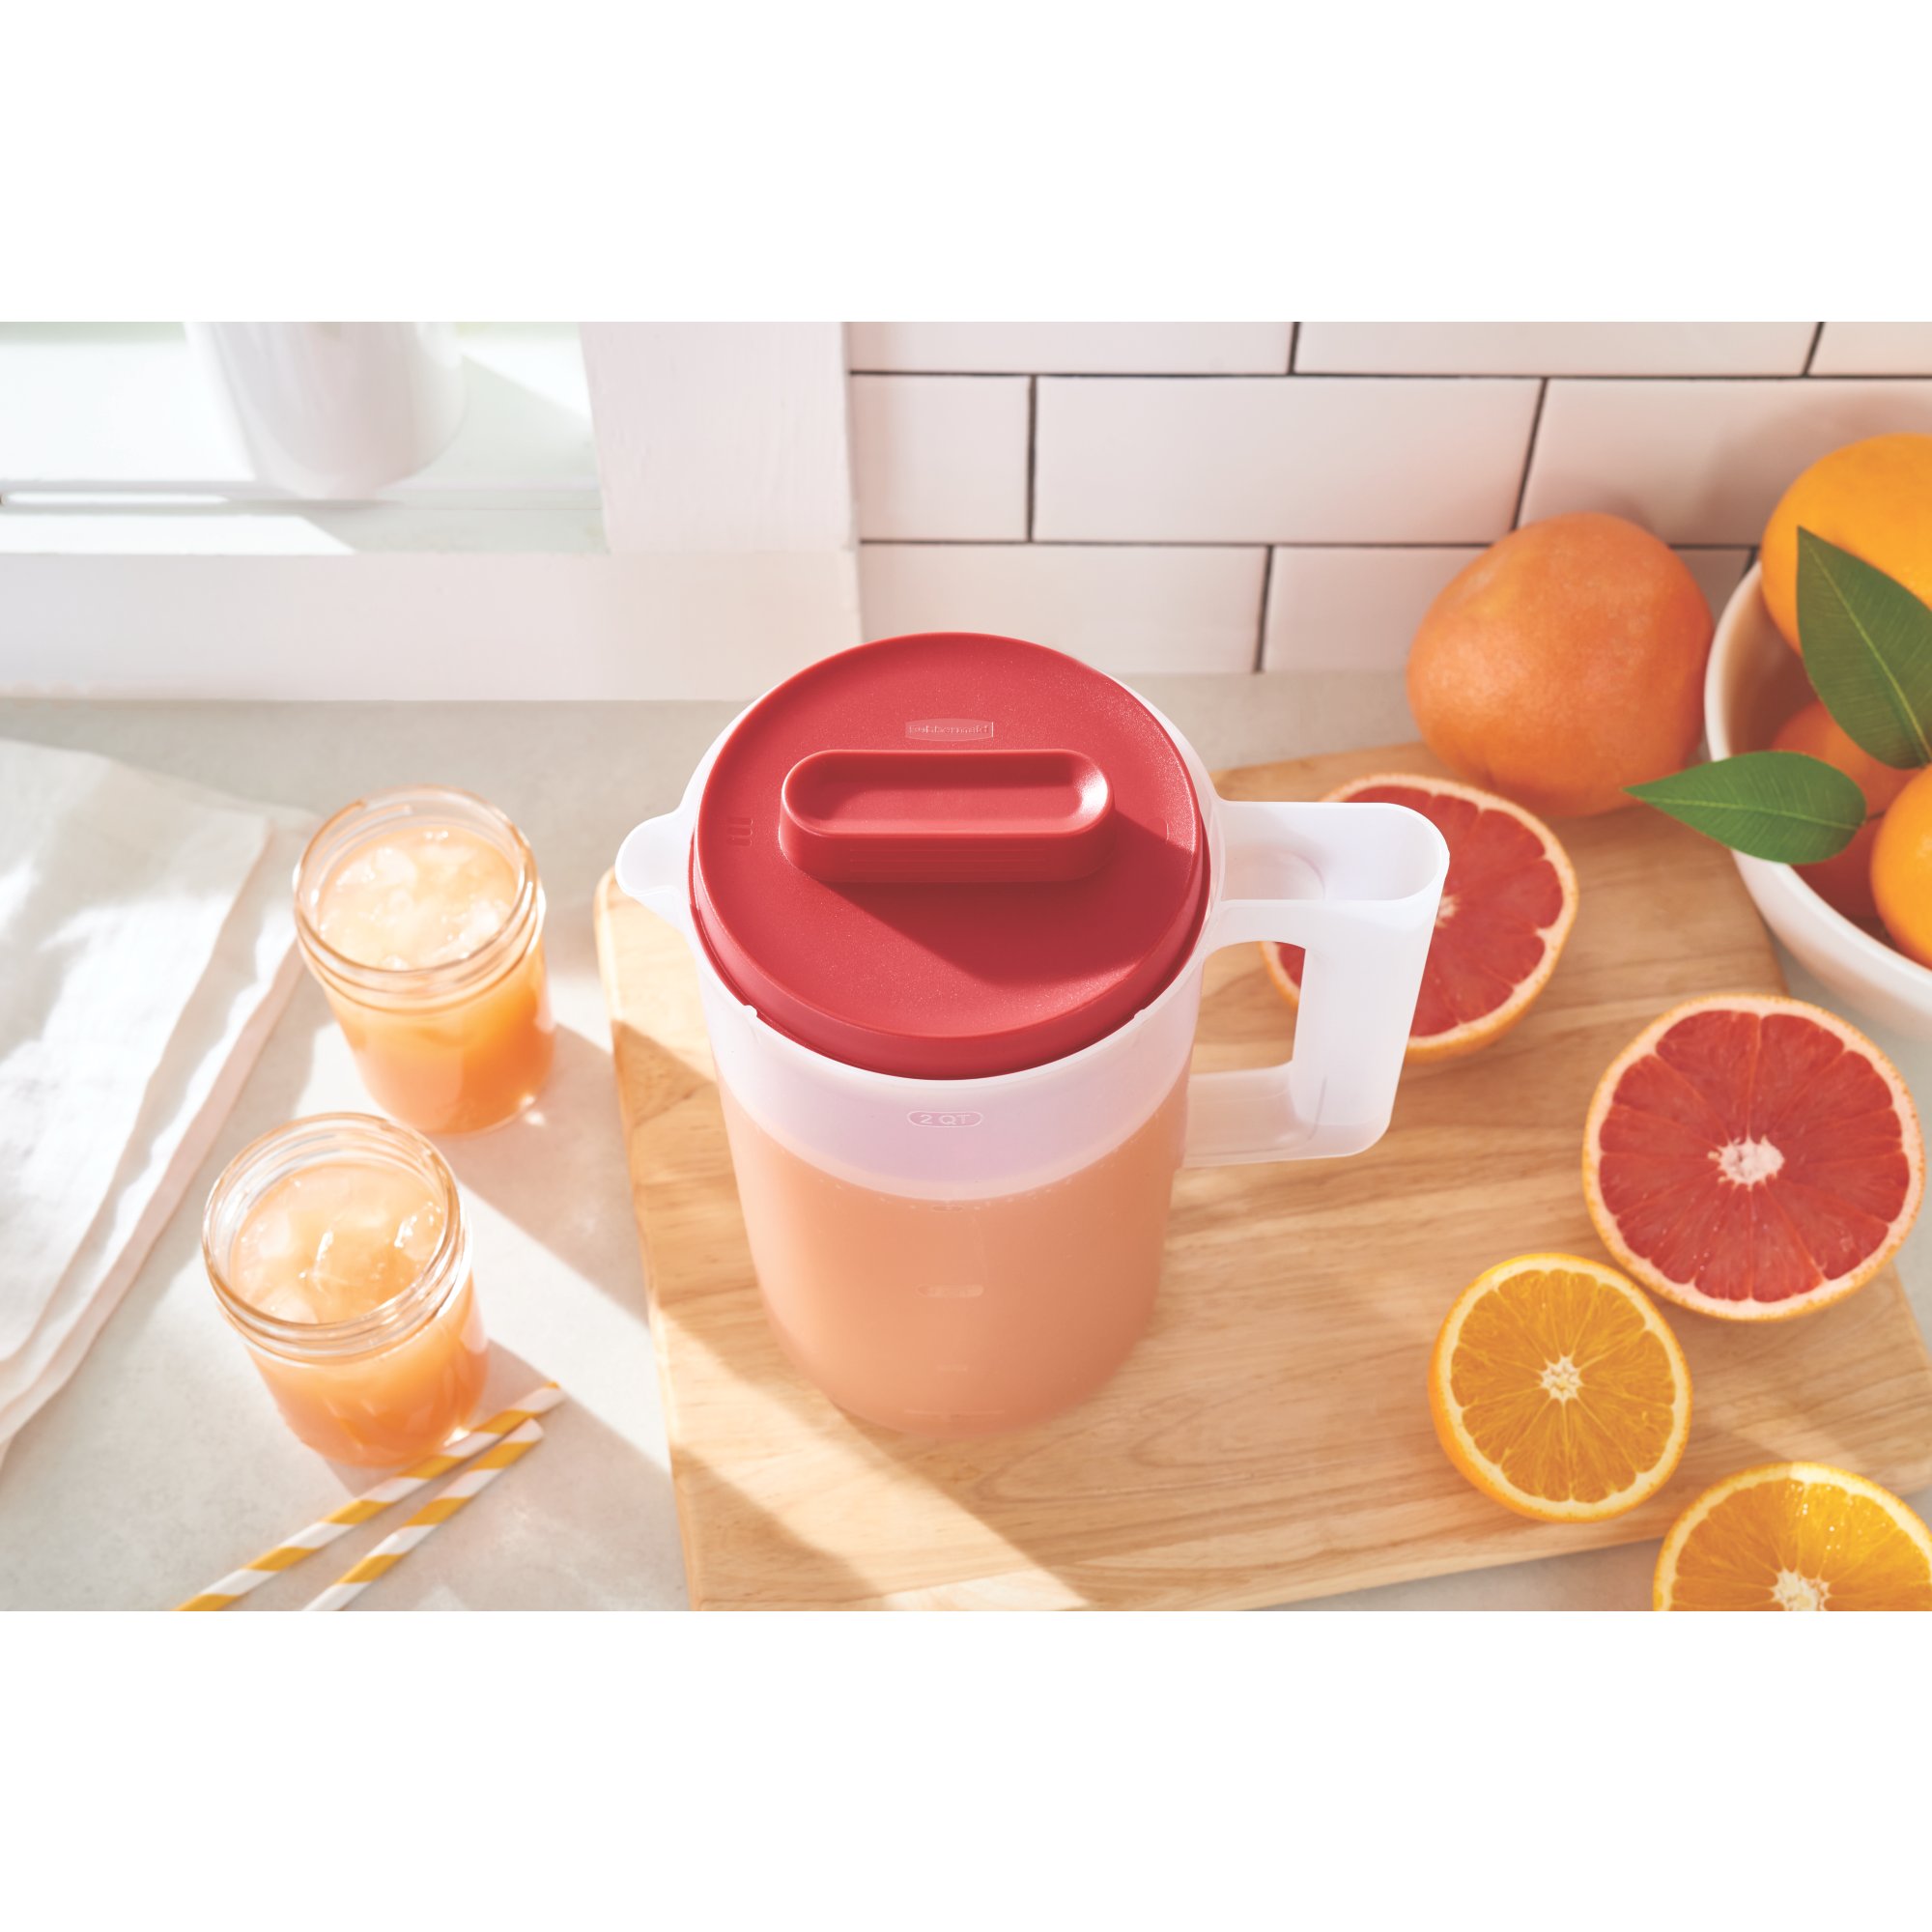 https://s7d9.scene7.com/is/image/NewellRubbermaid/2122587-rubbermaid-food-storage-simply-pour-pitcher-2qt-red-kitchen-with-food-lifestyle-4?wid=2000&hei=2000